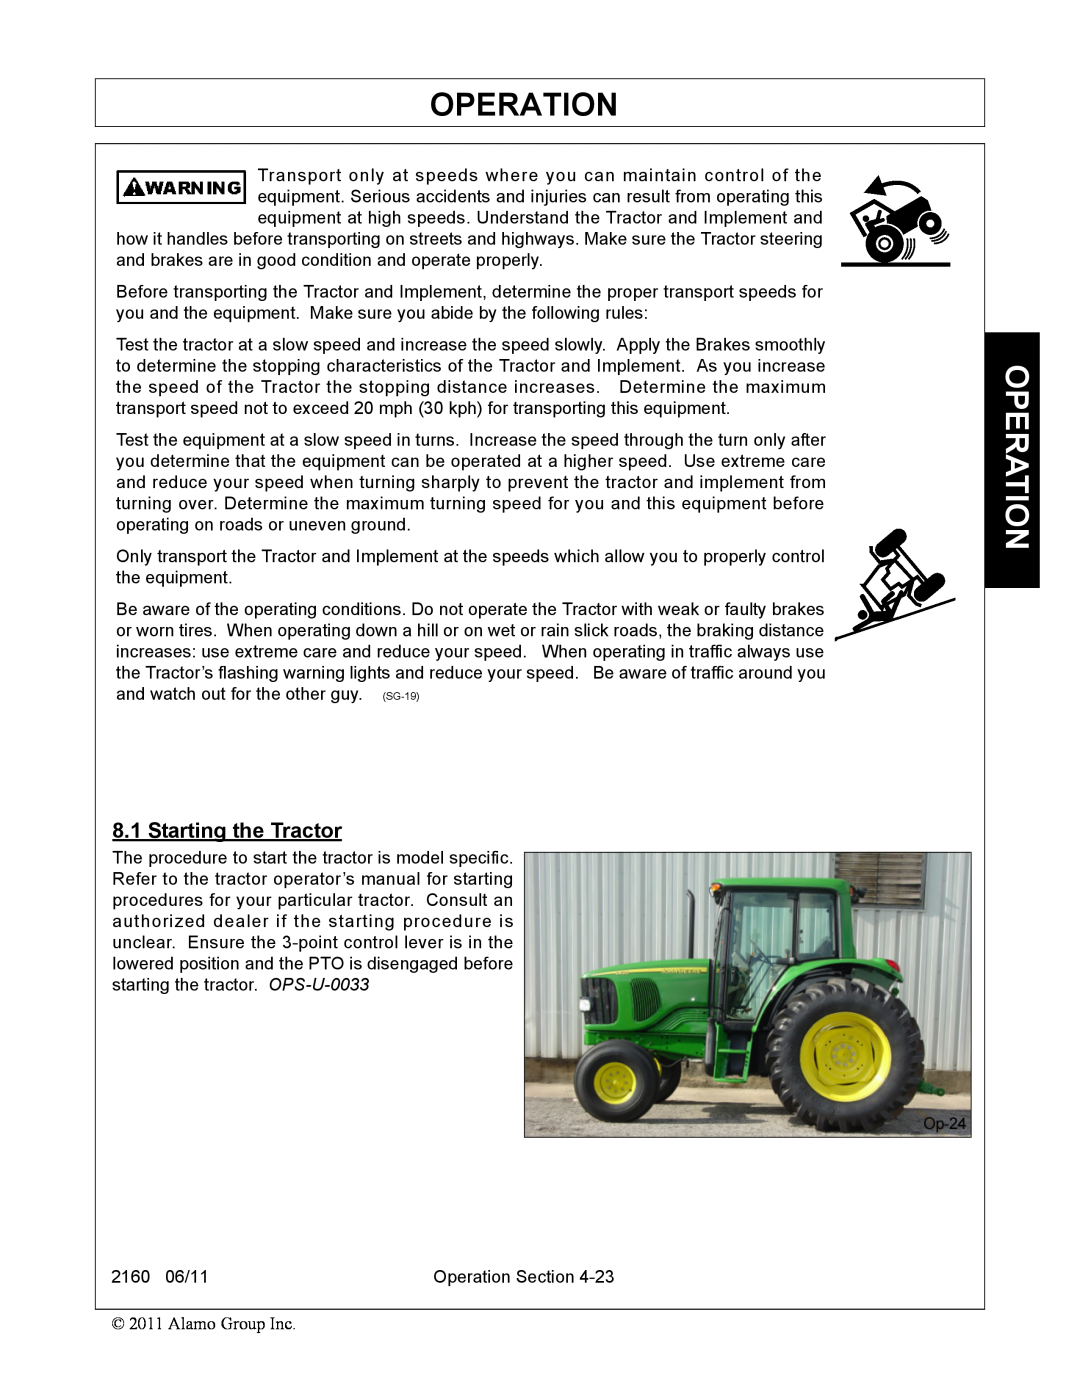 Servis-Rhino 2160 manual Operation, Starting the Tractor 